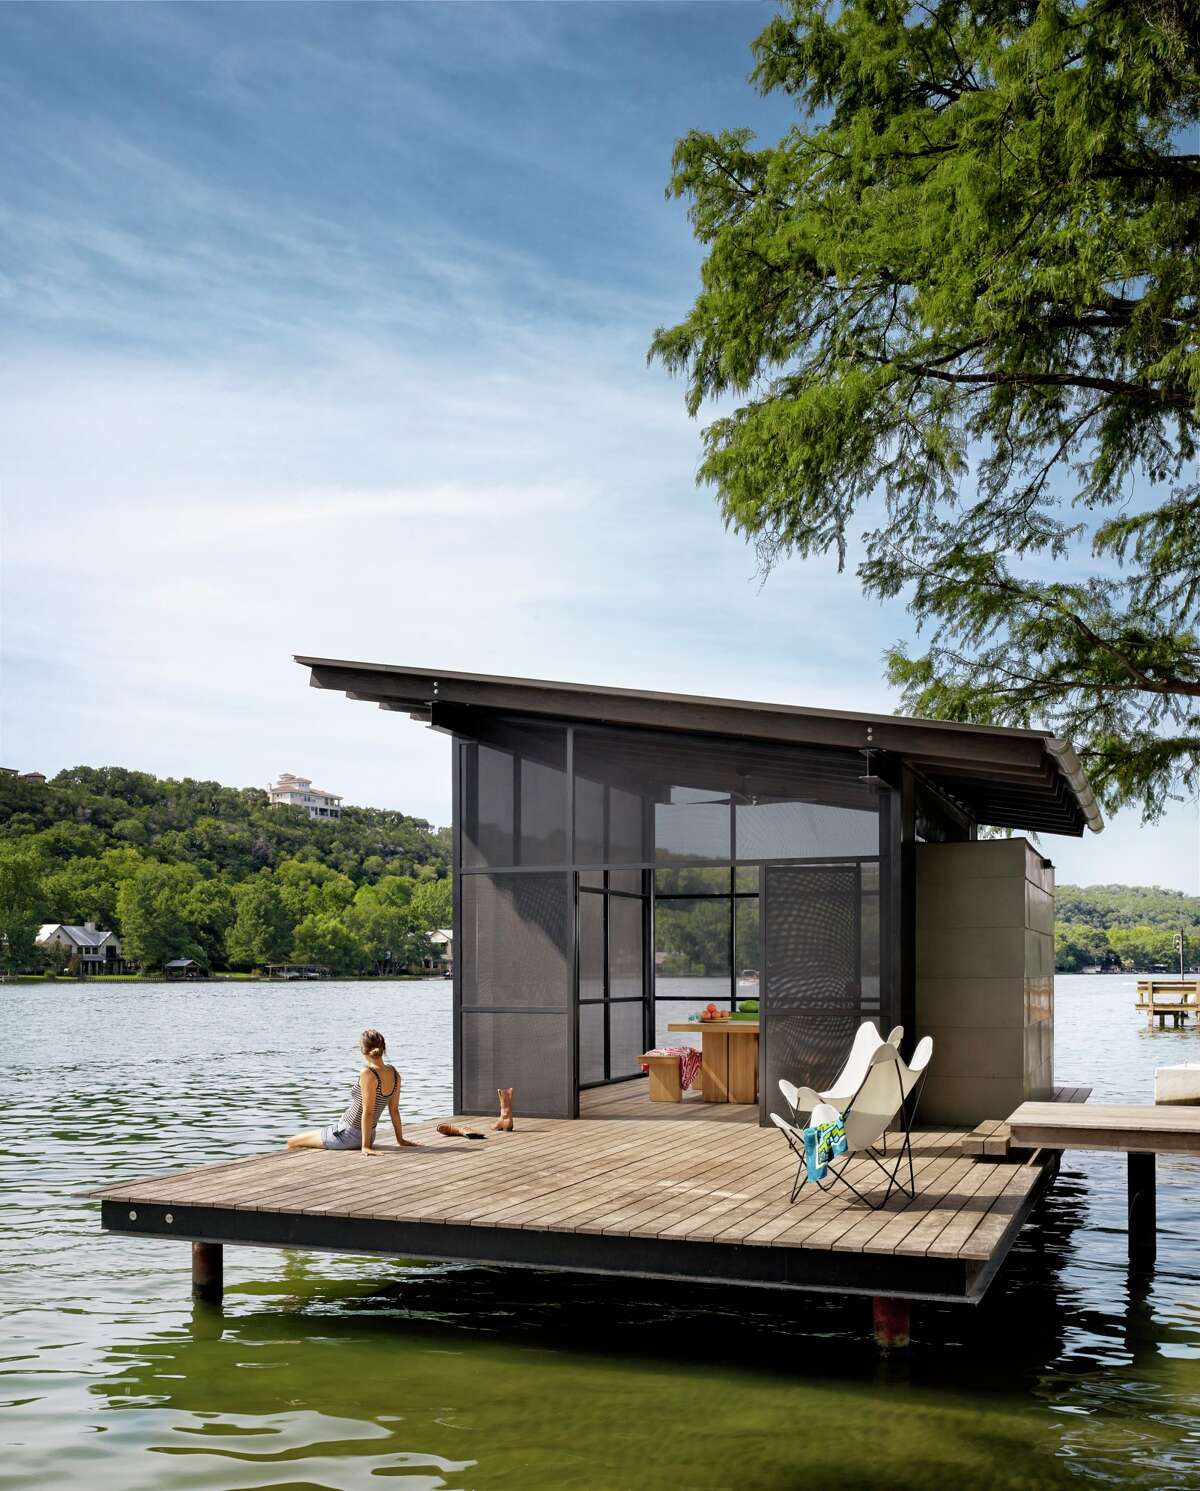 Architects at Lake|Flato of San Antonio were honored for their work on this stunning property in Austin called the Hog Pen Creek Retreat.